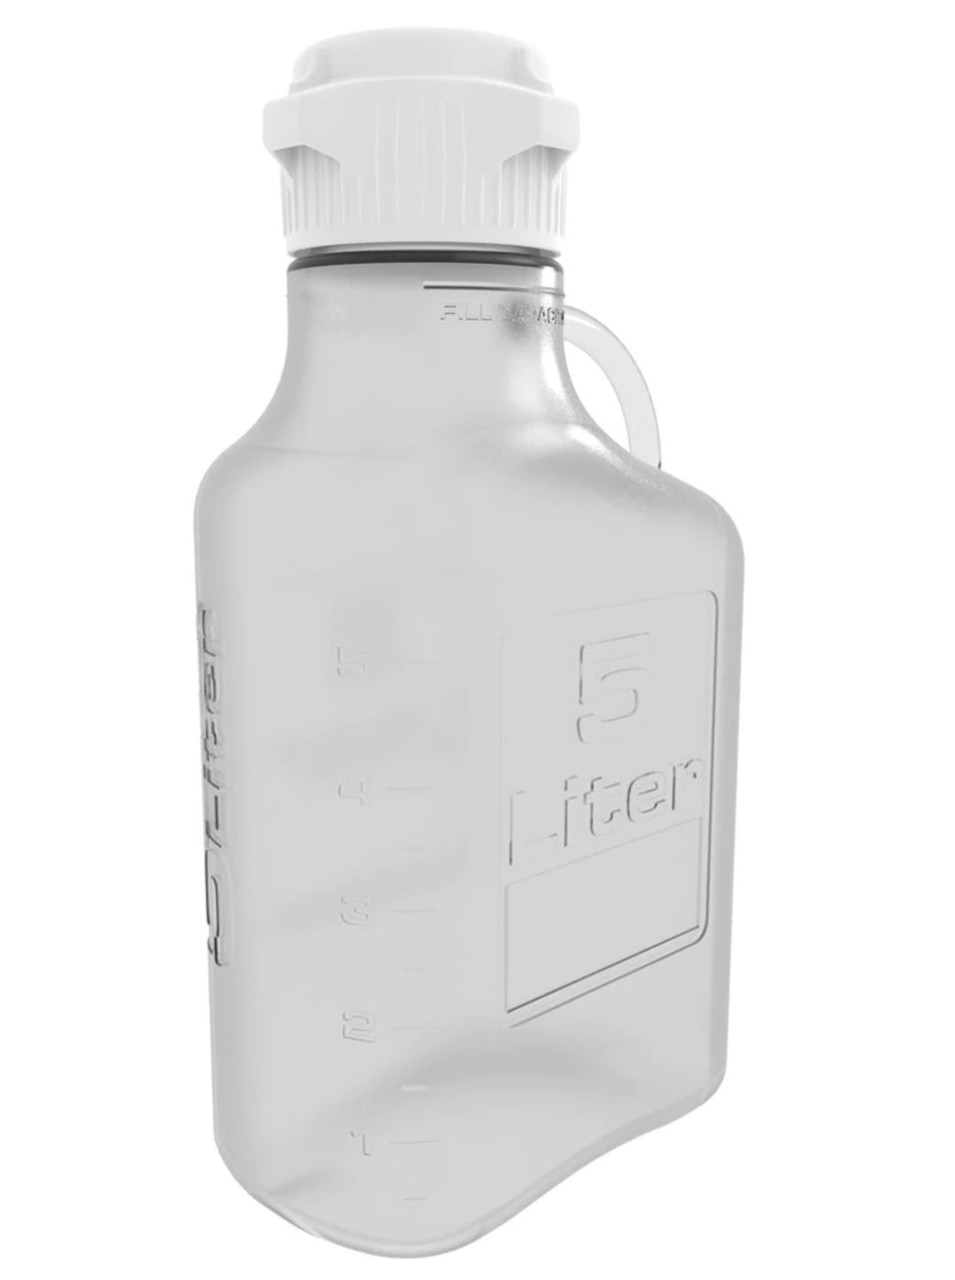 https://cdn11.bigcommerce.com/s-w9bdixgj/images/stencil/1280x1280/products/5098/10995/5L_BPA-Free_PETG_Carboy_With_83mm_Cap_For_Mixing_Storing_And_Transporting_Liquids_-_Lab_Storage_Supplies_-_Stellar_Scientific__82196.1651776965.jpg?c=2